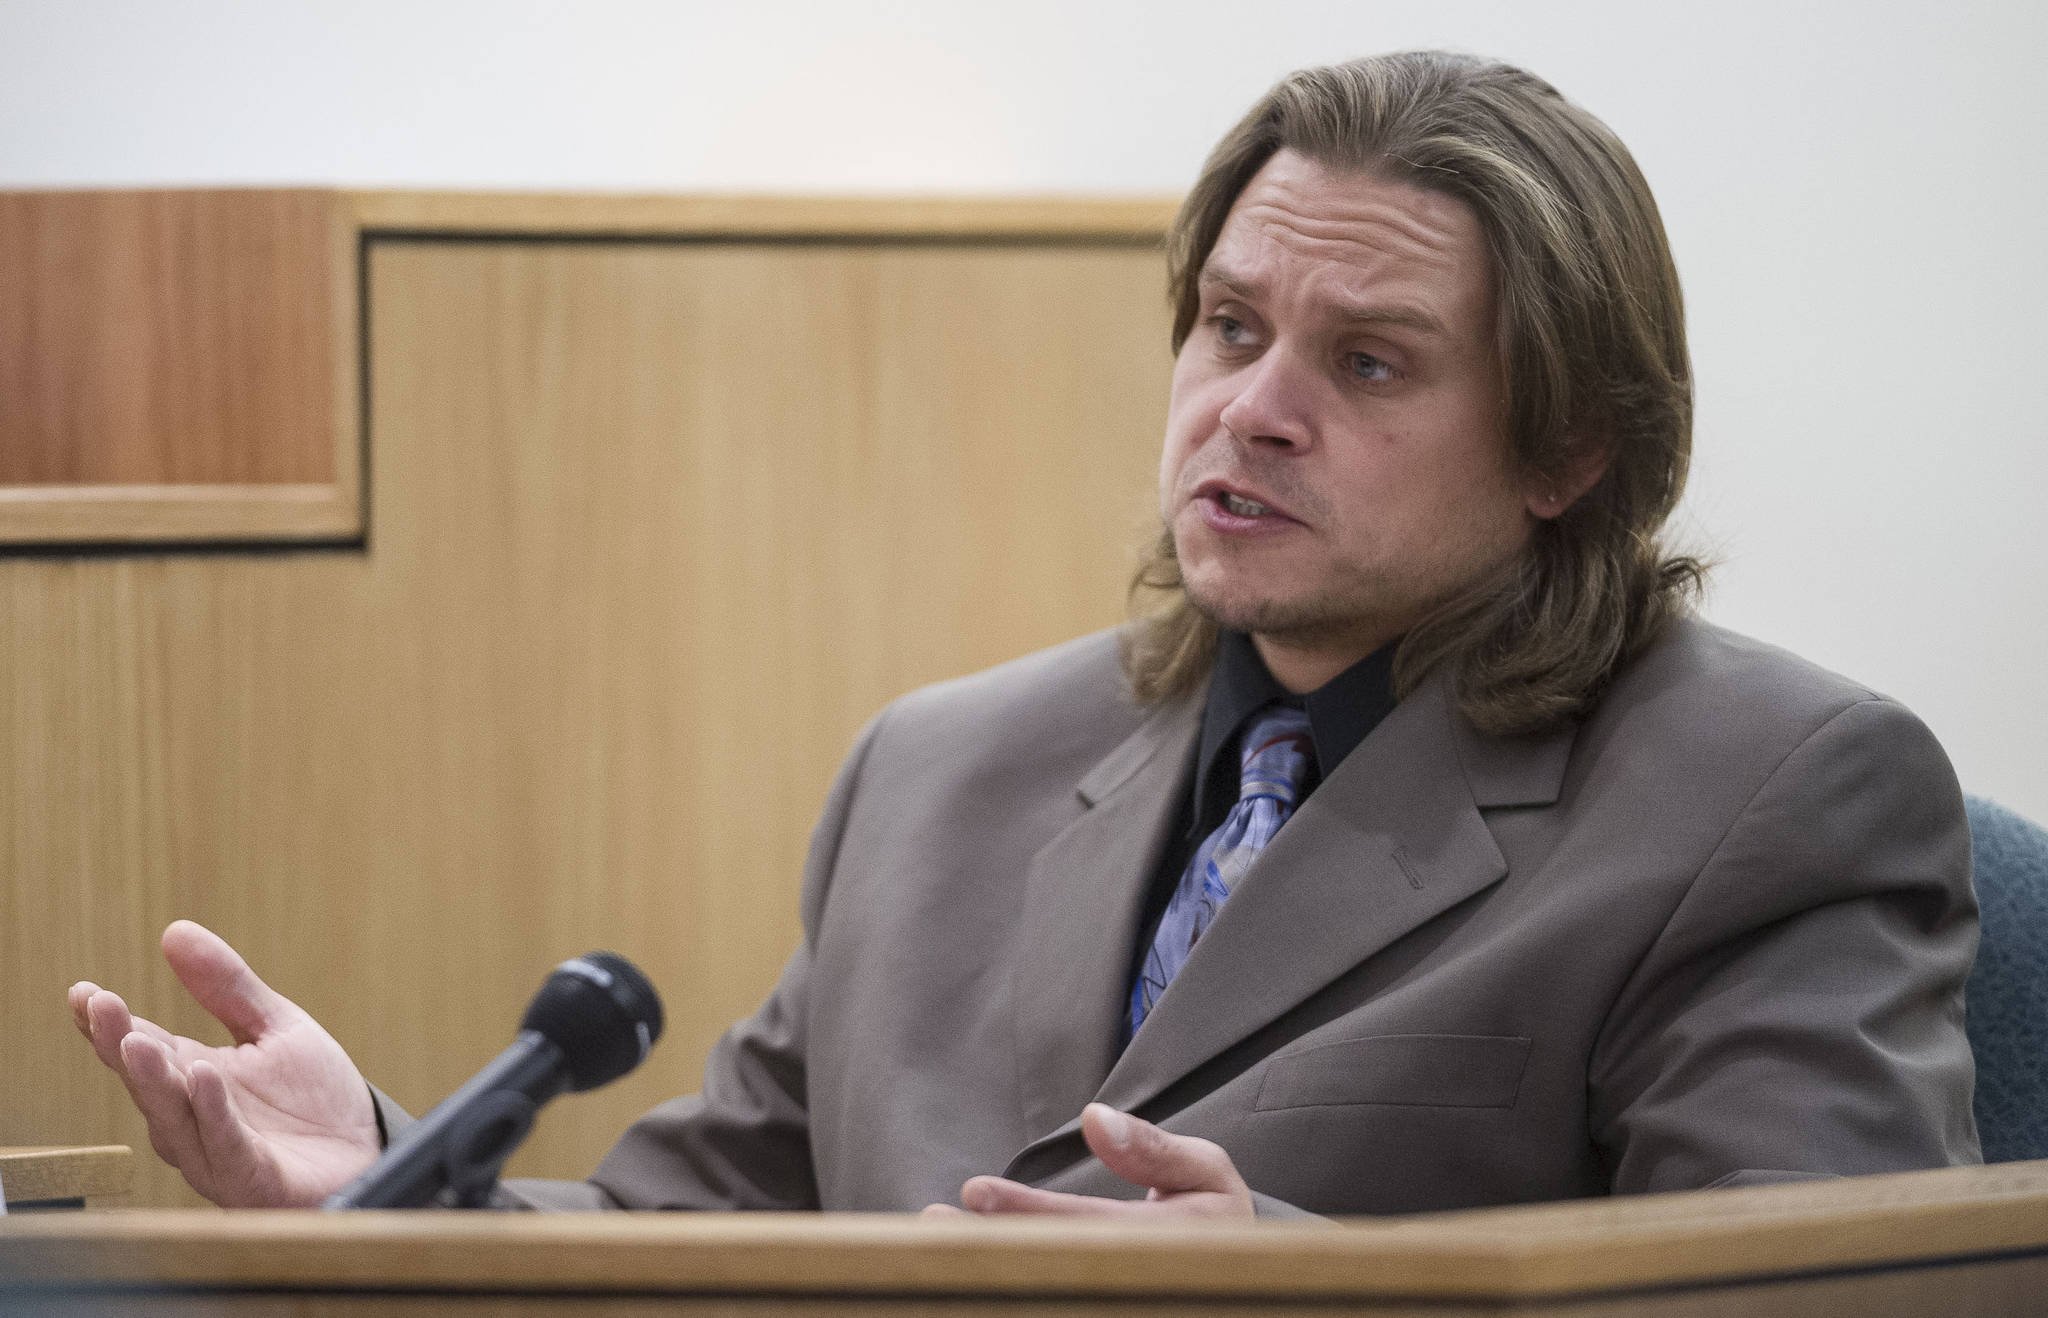 Tim Shockley, a resident of the Kodzoff Acres Mobile Home Park, answers questions by Christopher Strawn during Strawn’s trial in Juneau Superior Court on Tuesday, Oct. 17, 2017. Strawn, 34, faces charges of first-degree and second-degree murder, manslaughter, criminally negligent homicide, third-degree assault and weapons misconduct in the shooting death of Brandon Cook in October 2015. (Michael Penn | Juneau Empire)